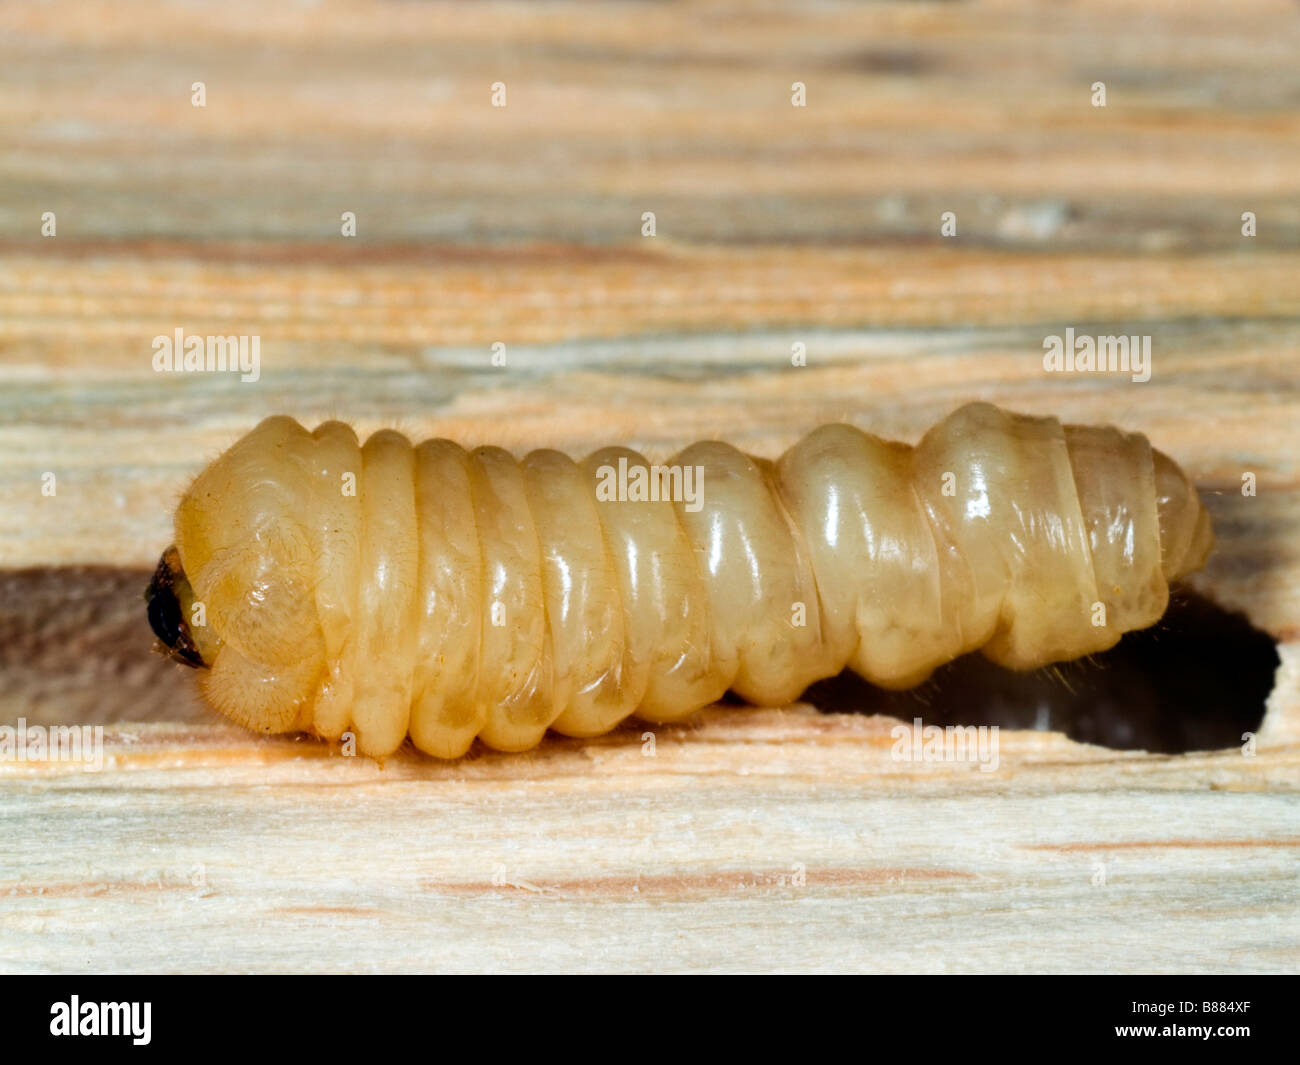 Larva of a woodworm beetle found in oak. Surrey, England, UK. Stock Photo